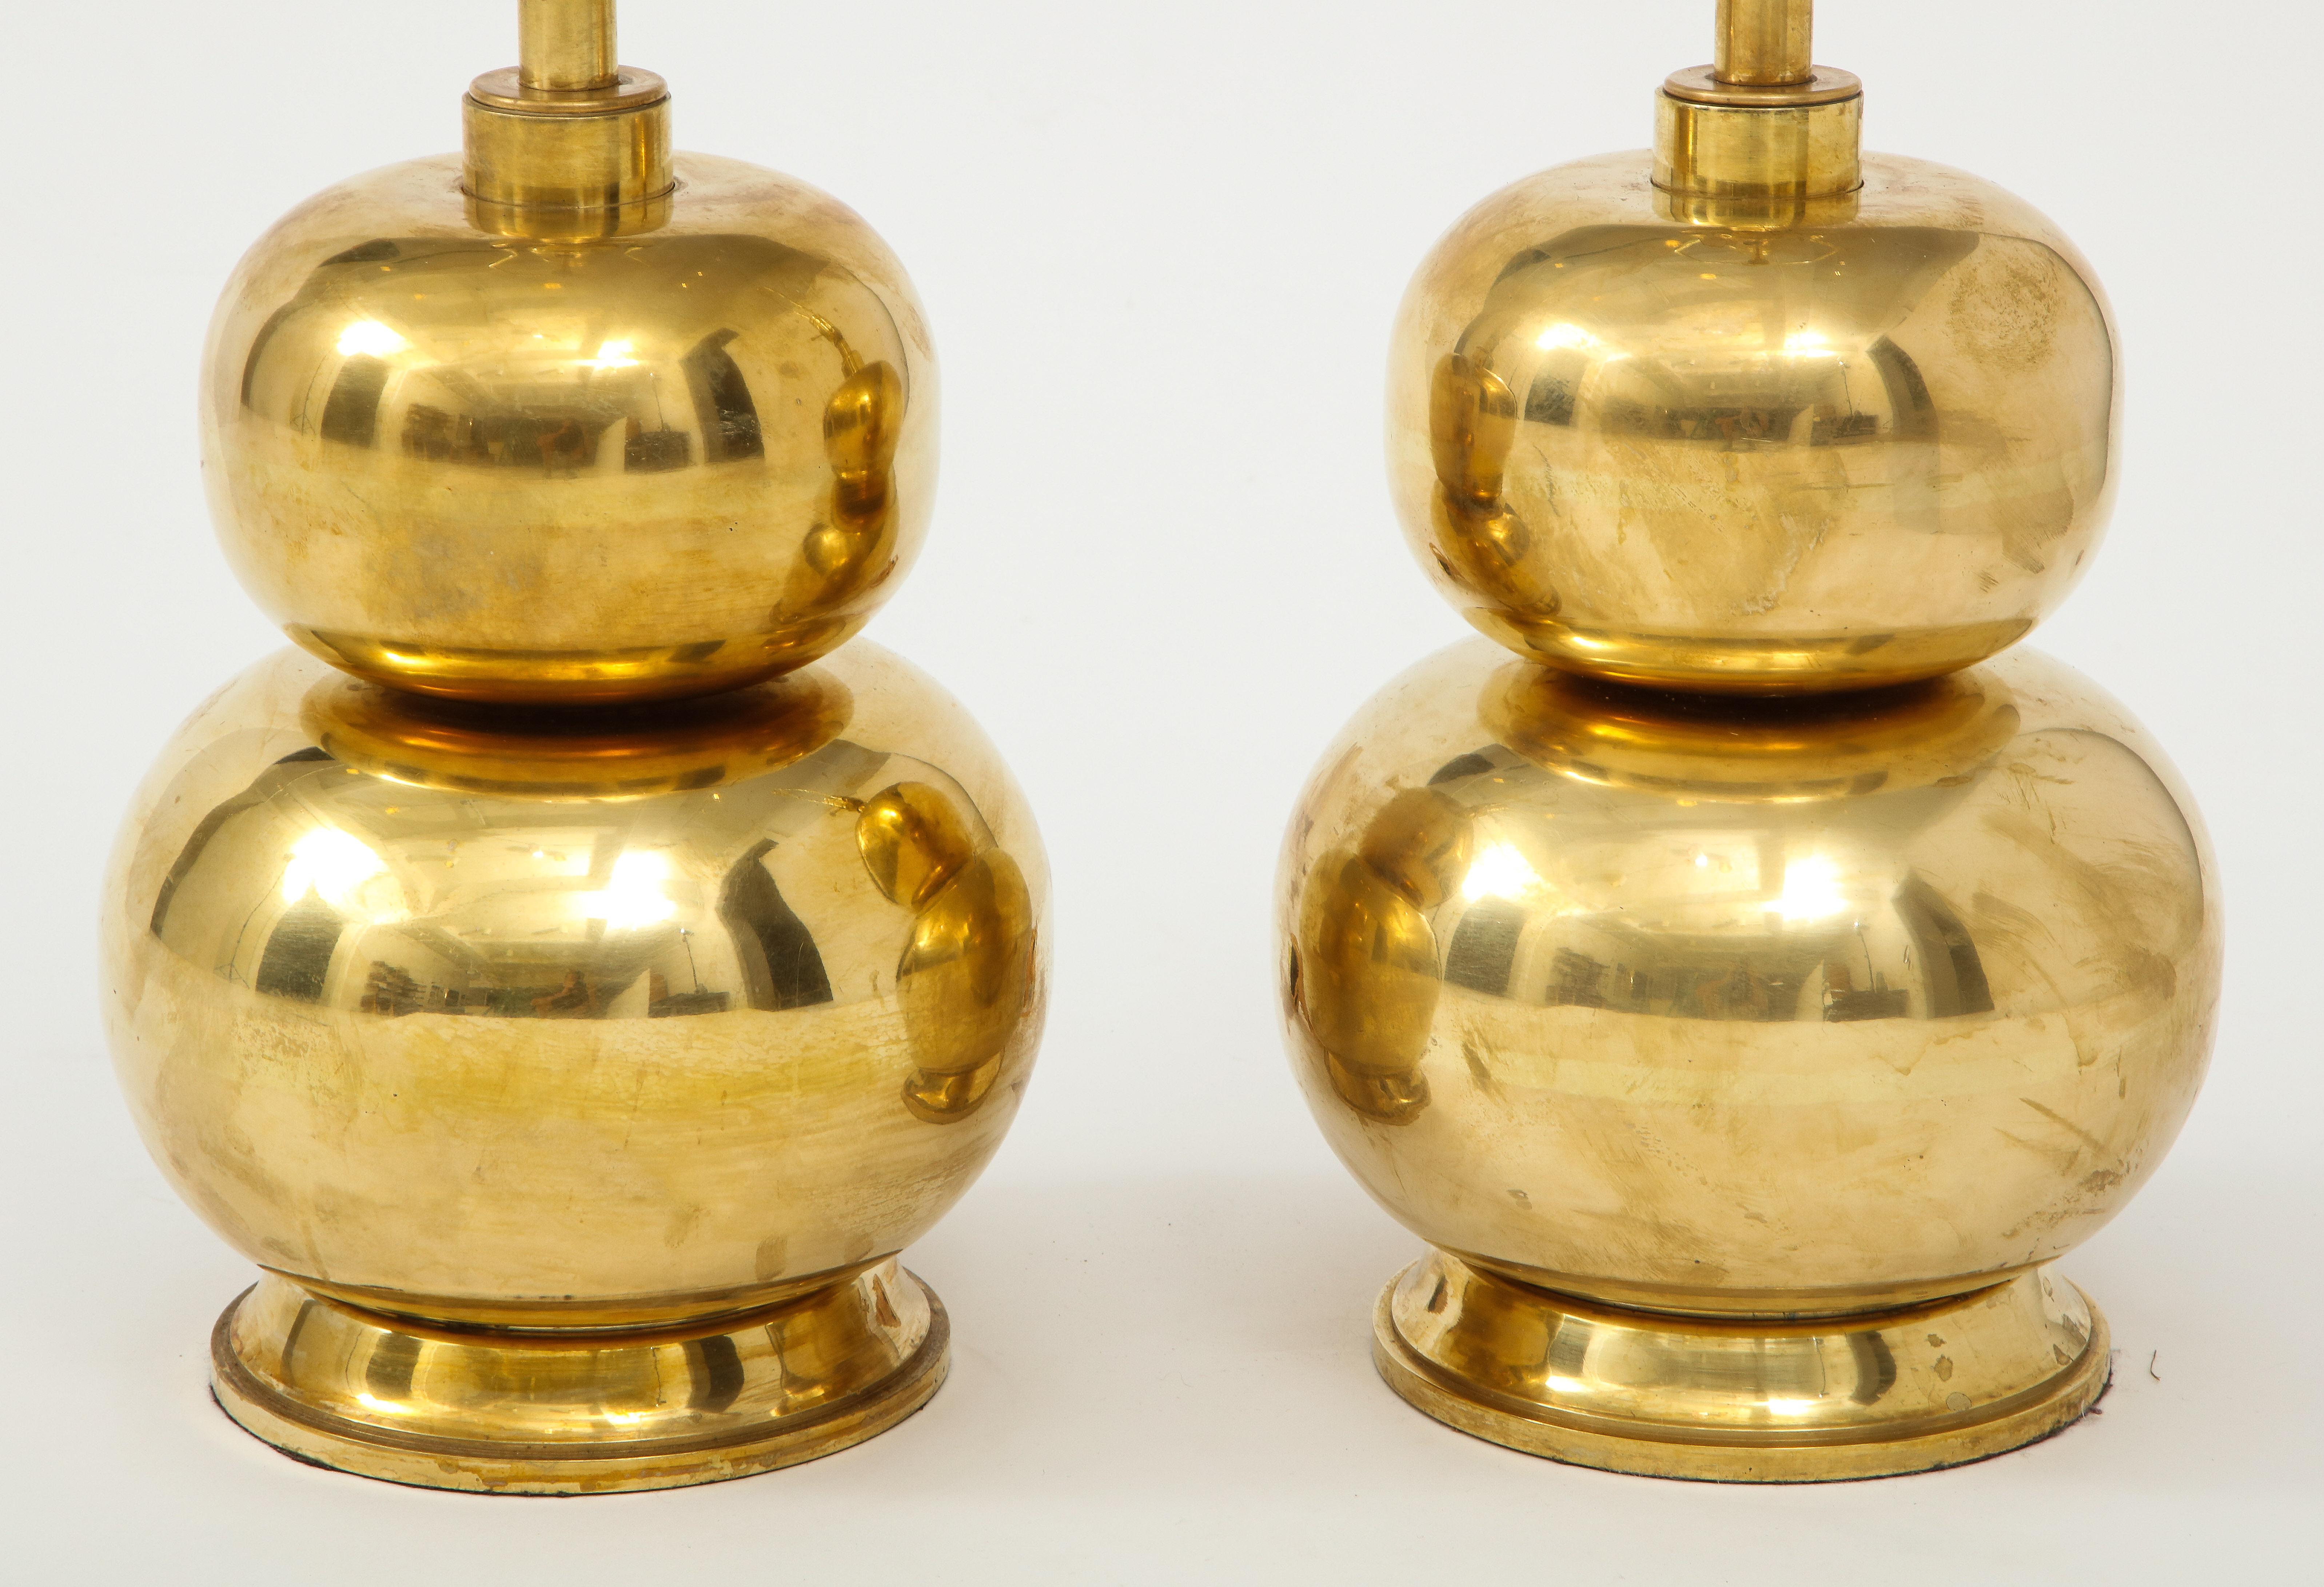 A pair of eye catching gourd shaped lamps in brass on a brass base with a wonderful warm patina. A great way to add a bit of shine to a room!